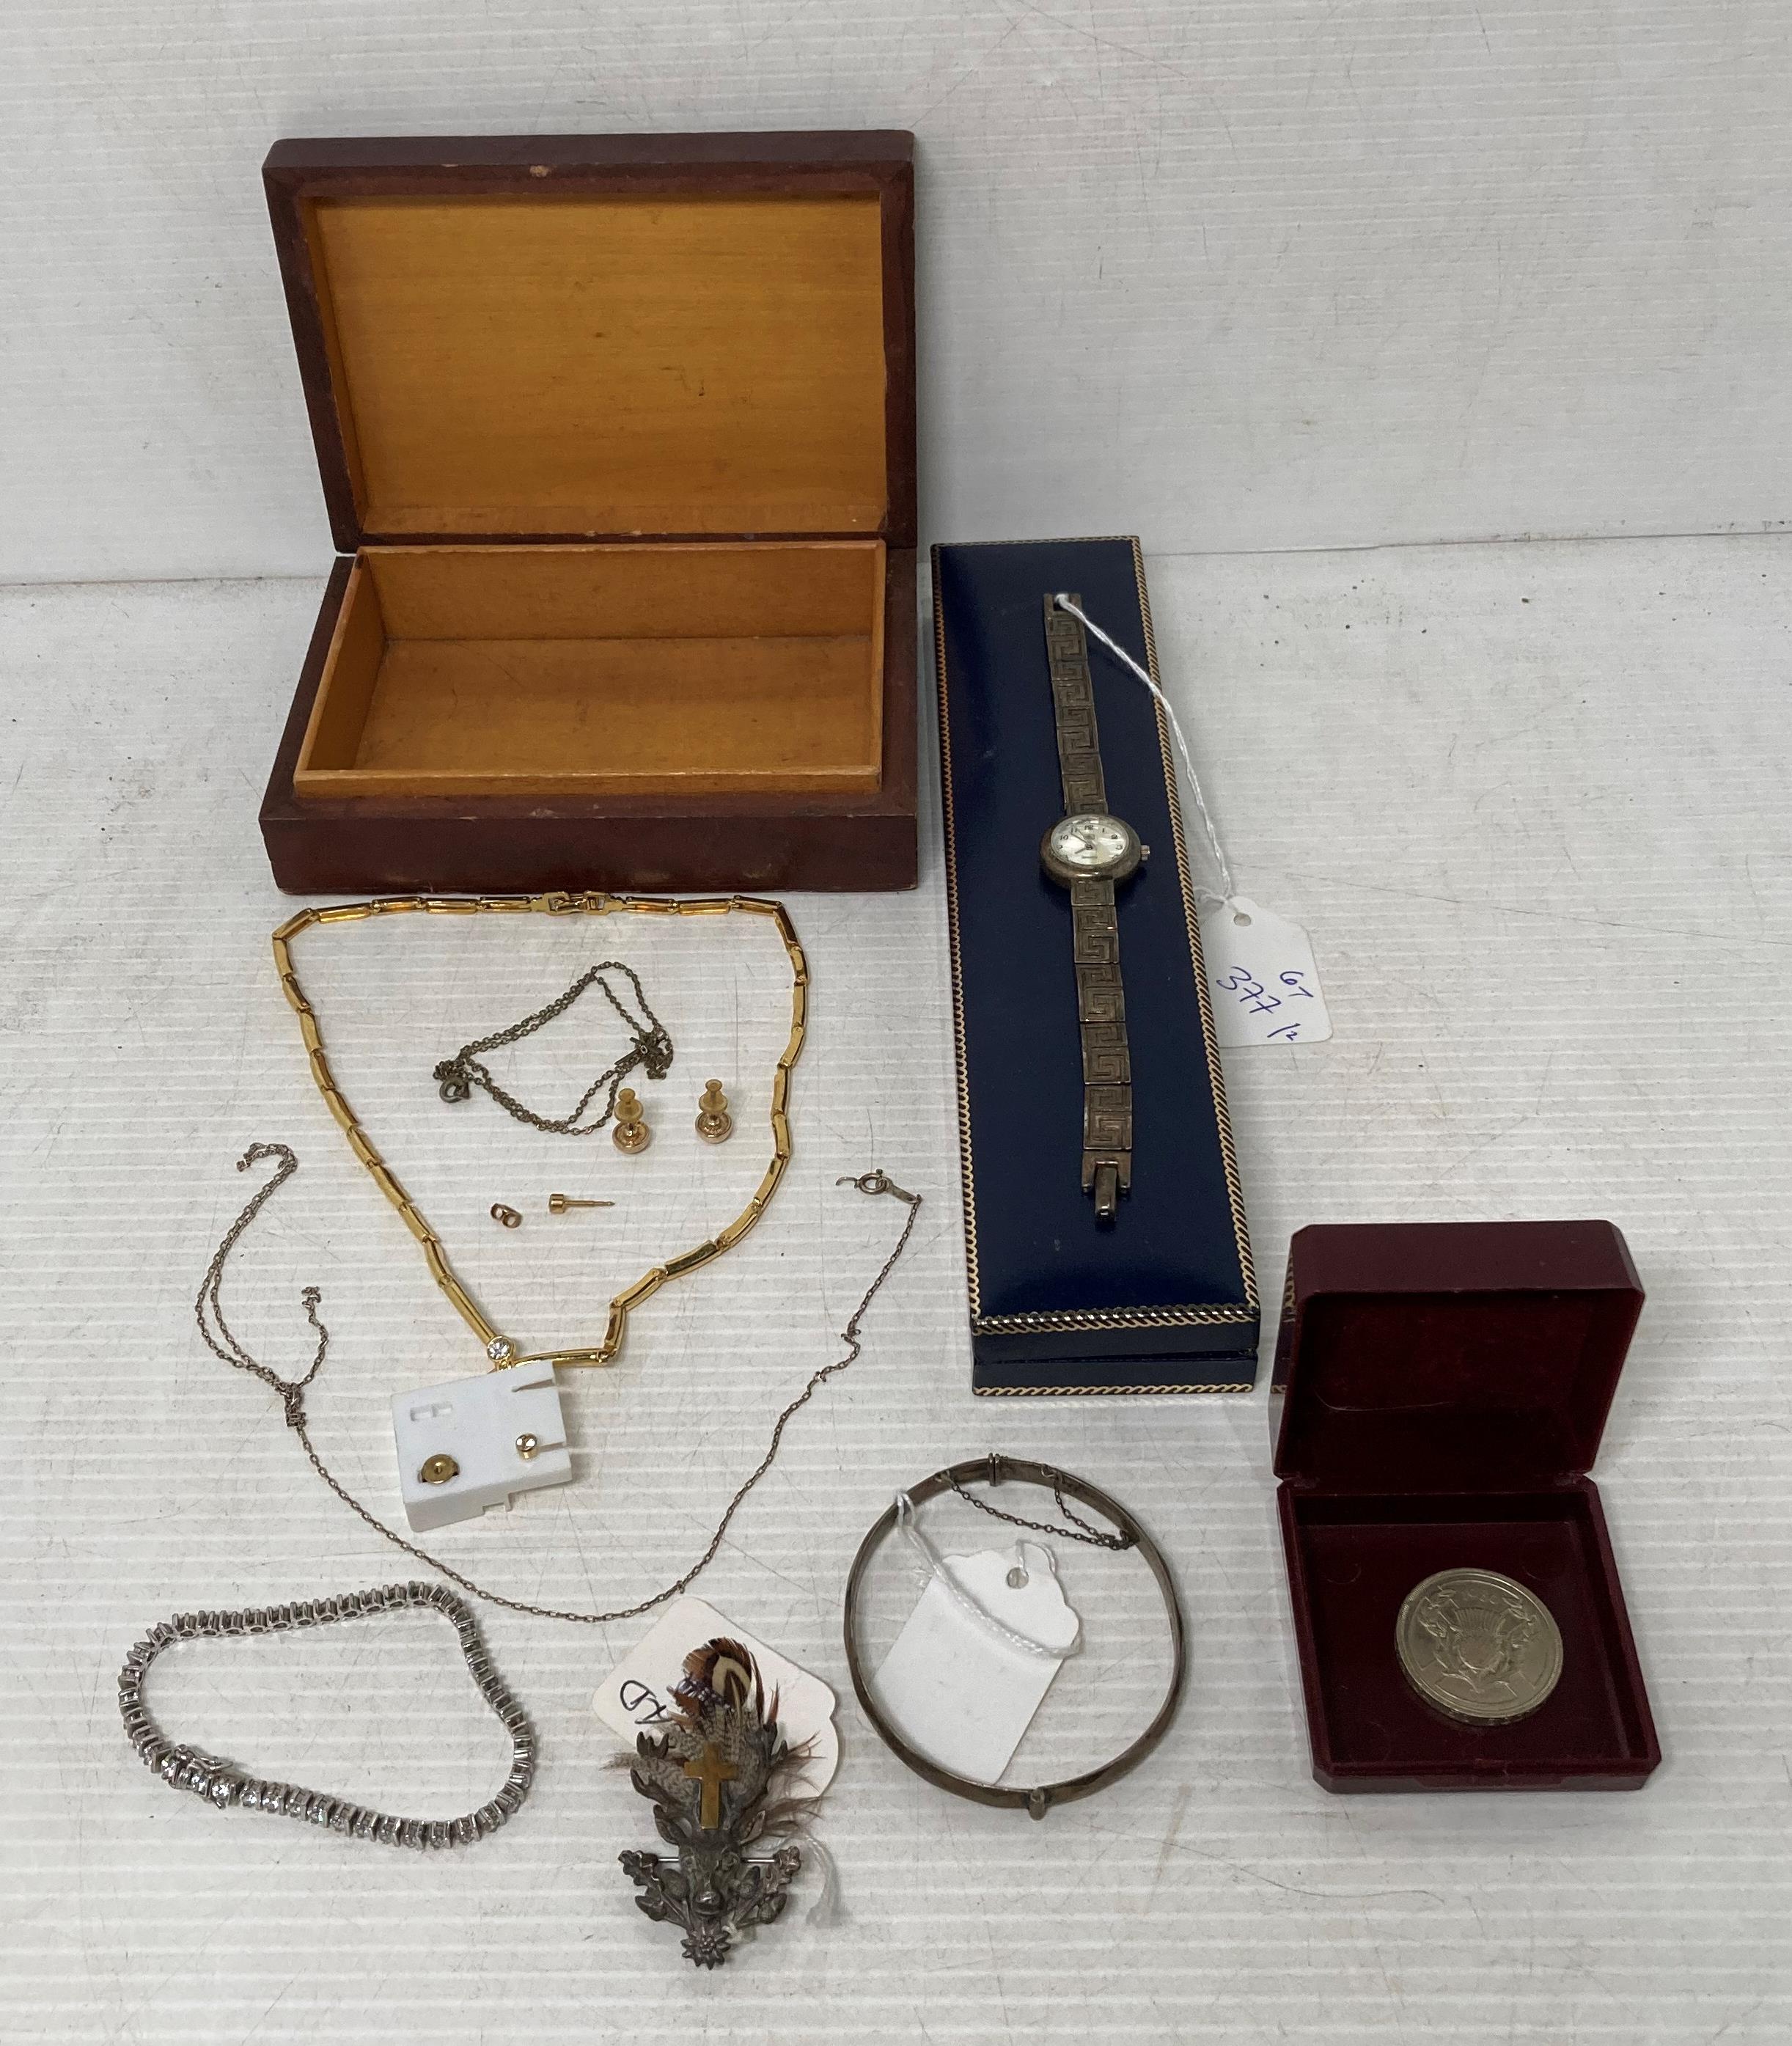 Contents to box and watch case - Sterling Silver (. - Image 5 of 8